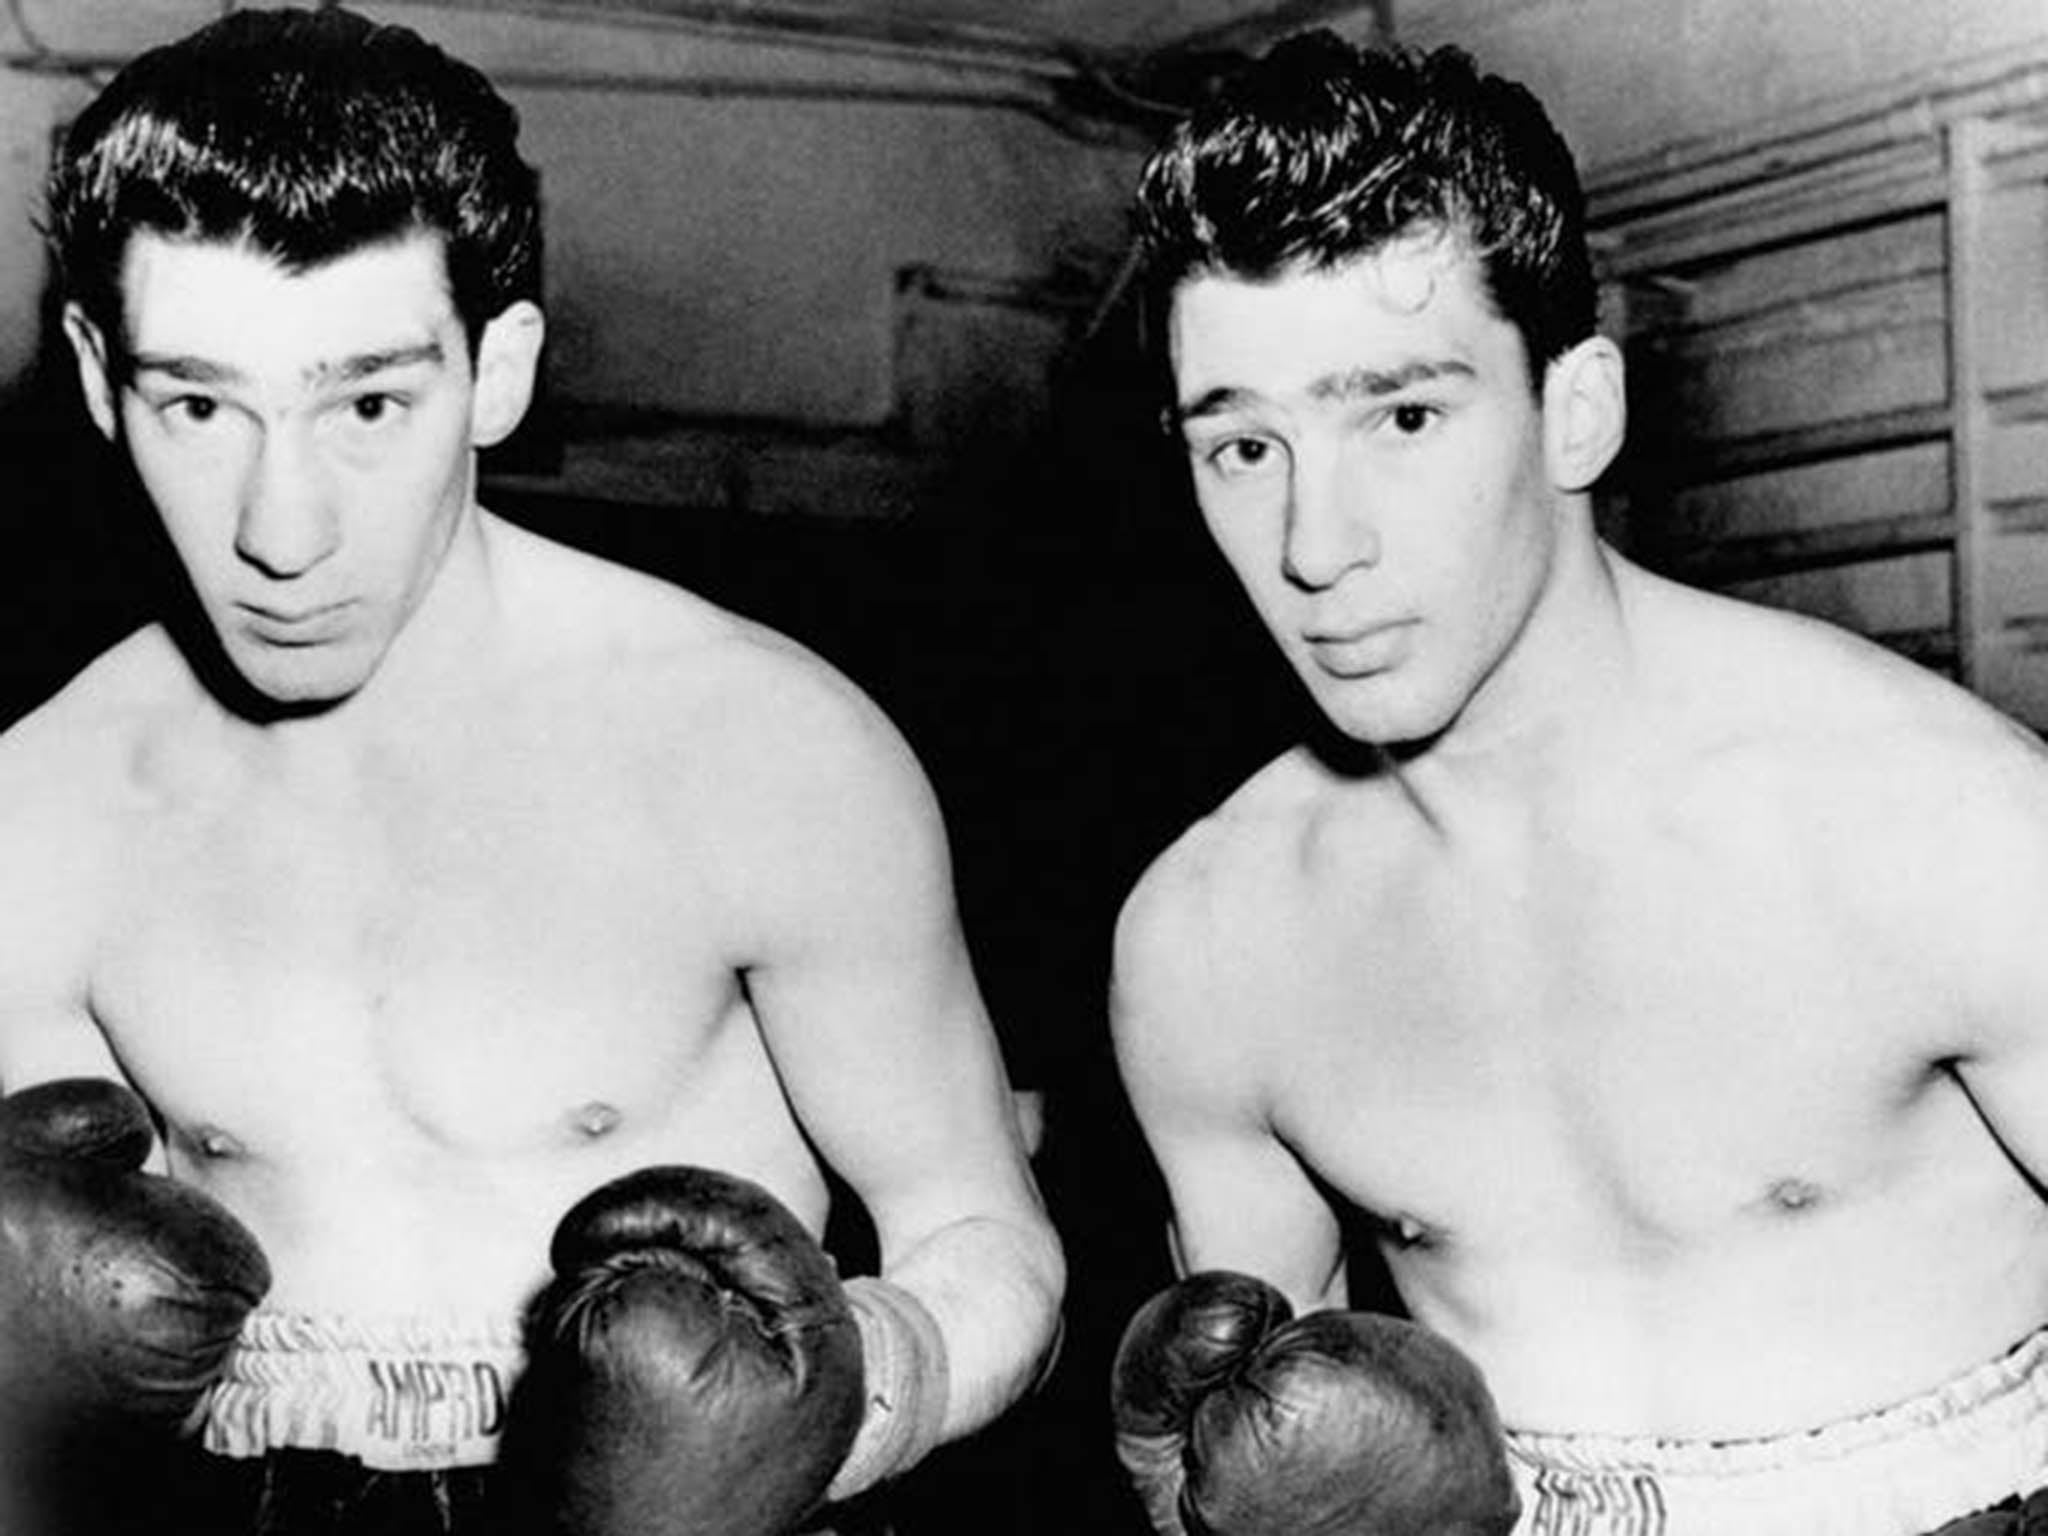 Ronnie and Reggie as juvenile boxers